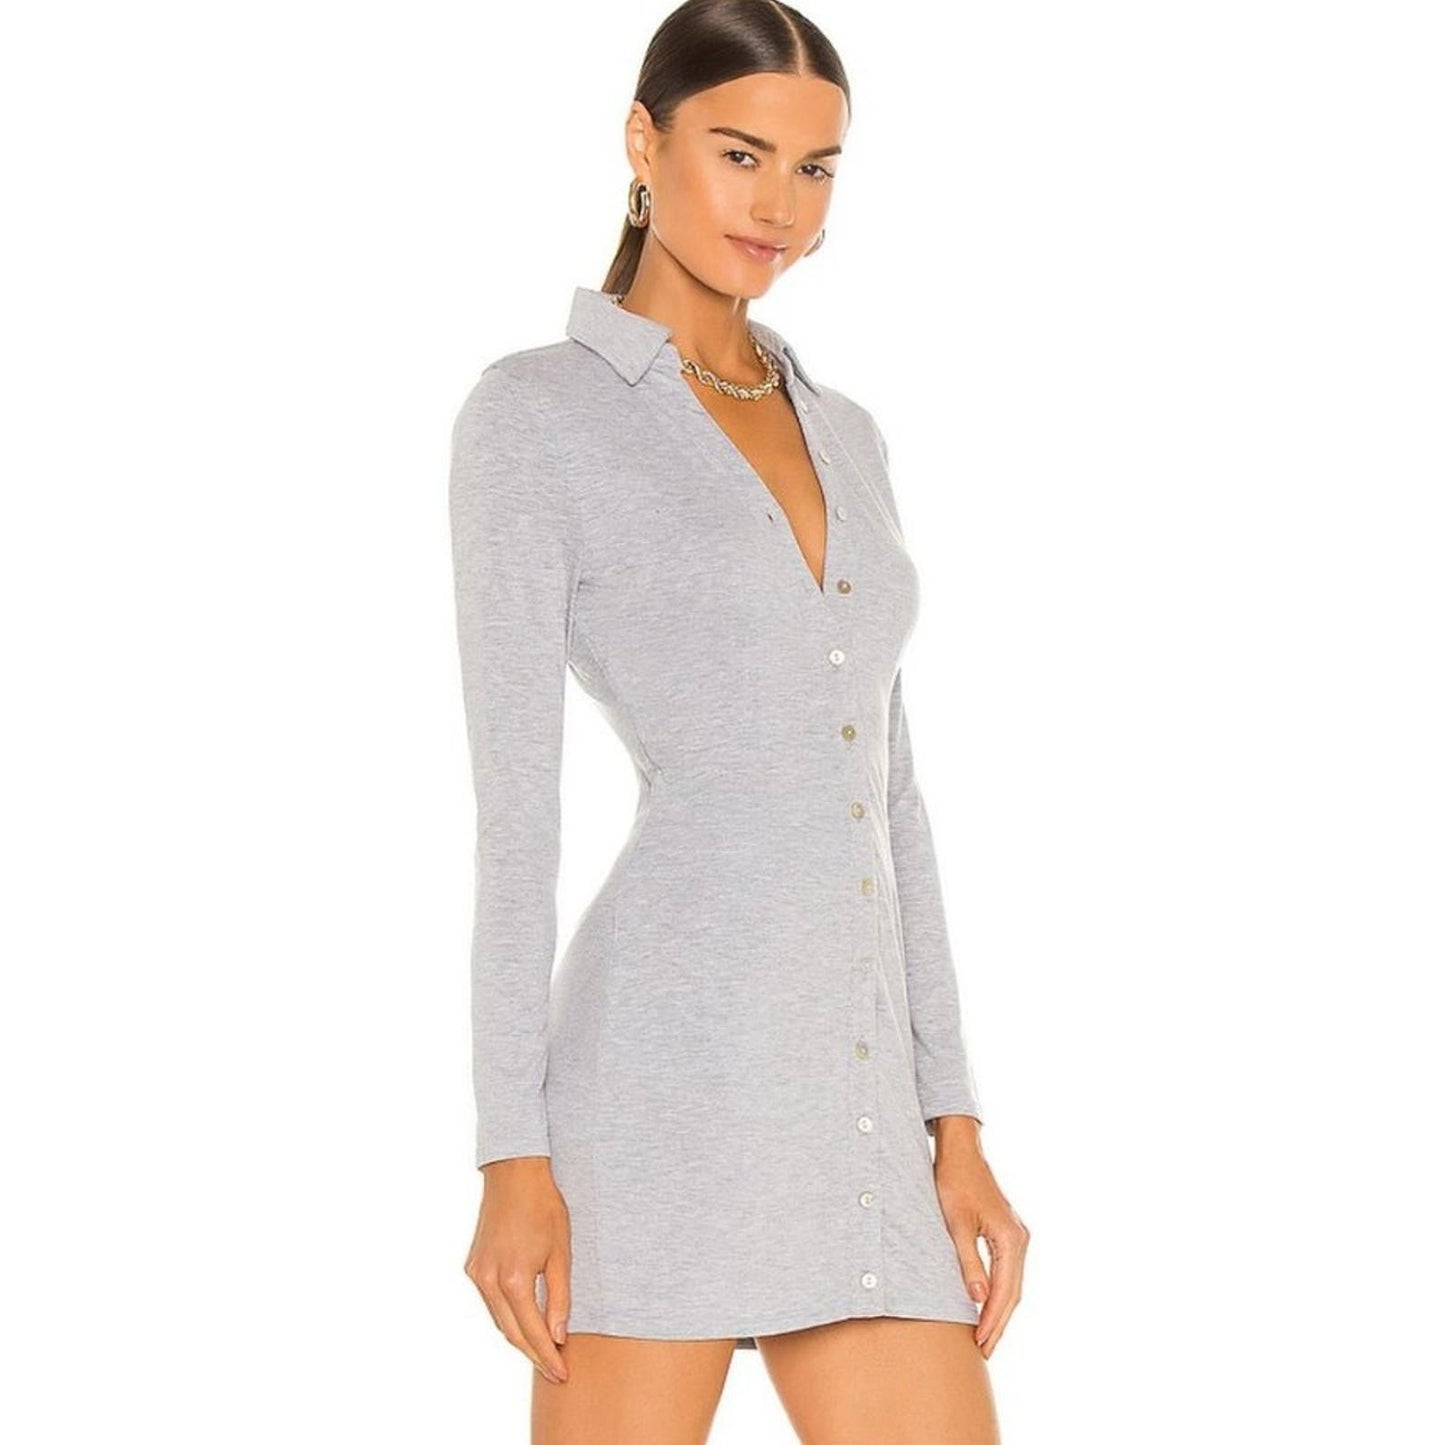 NBD Farris Button Up Mini Dress in Heather Gray NWOT Size Small